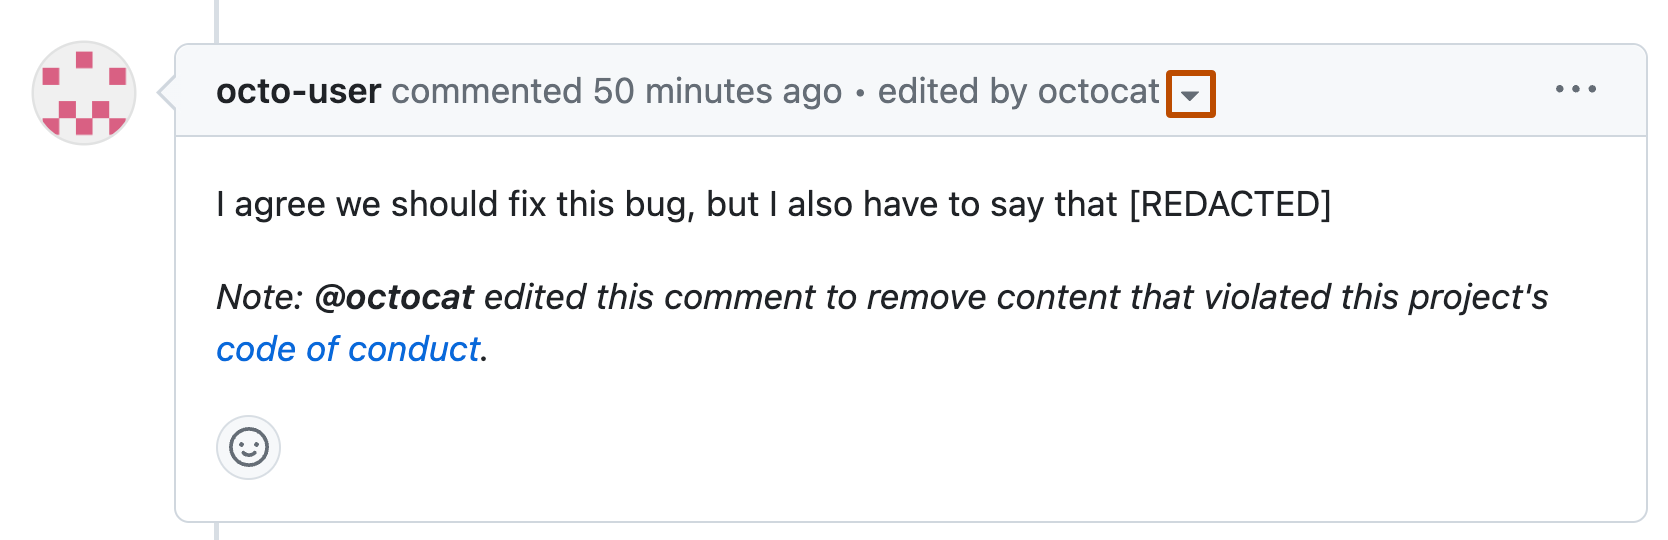 Screenshot of a comment by octo-user, which has been partially redacted. In the comment header, next to the text "edited by octocat", a dropdown icon is outlined in orange.